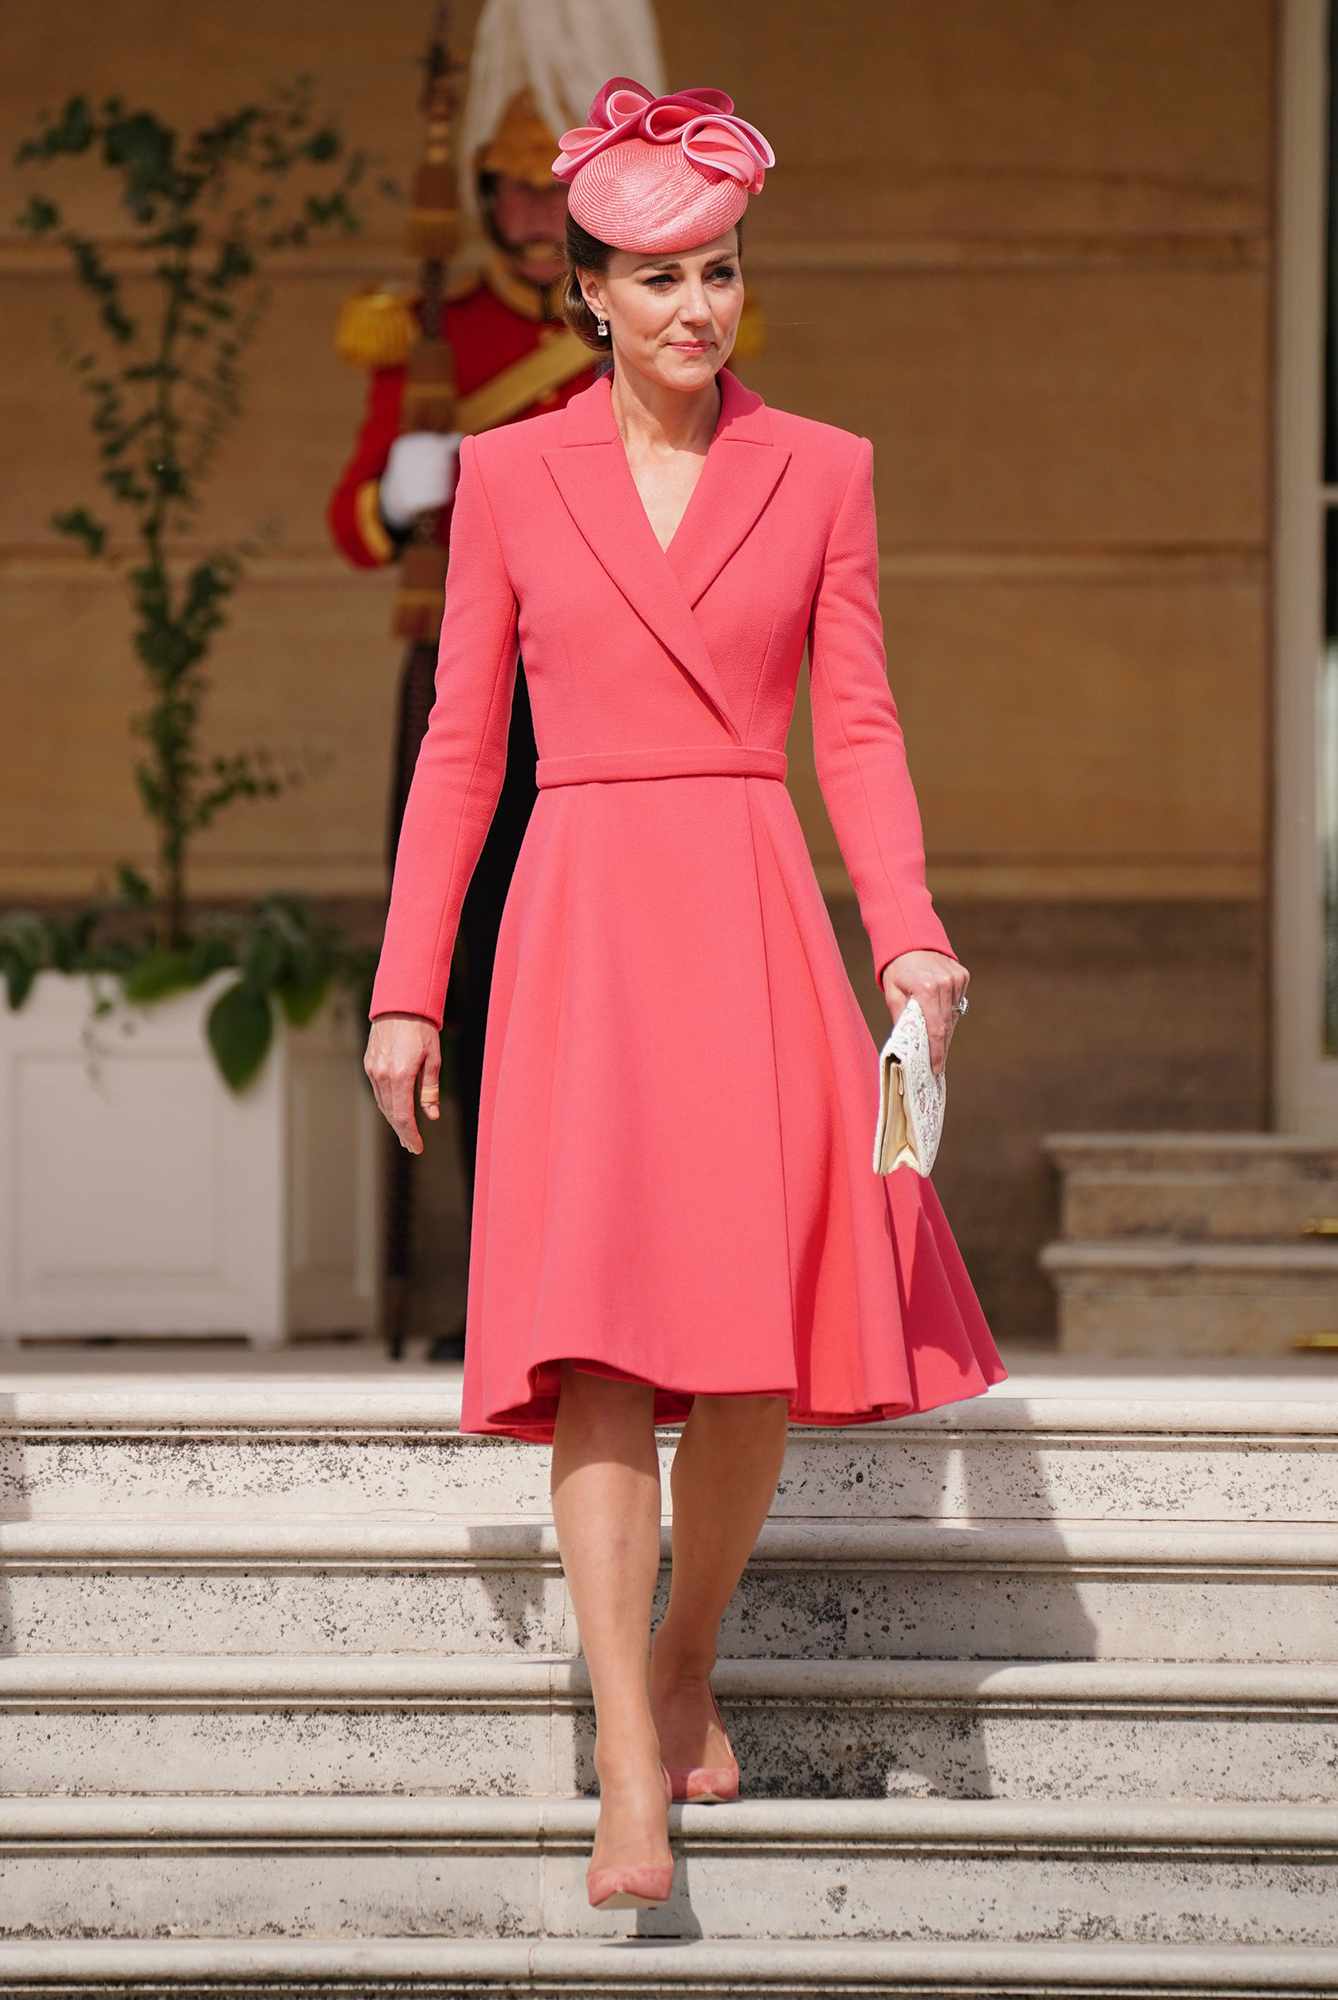 Kate Middleton Steps Out in Coral at Buckingham Palace Garden Party |  PEOPLE.com